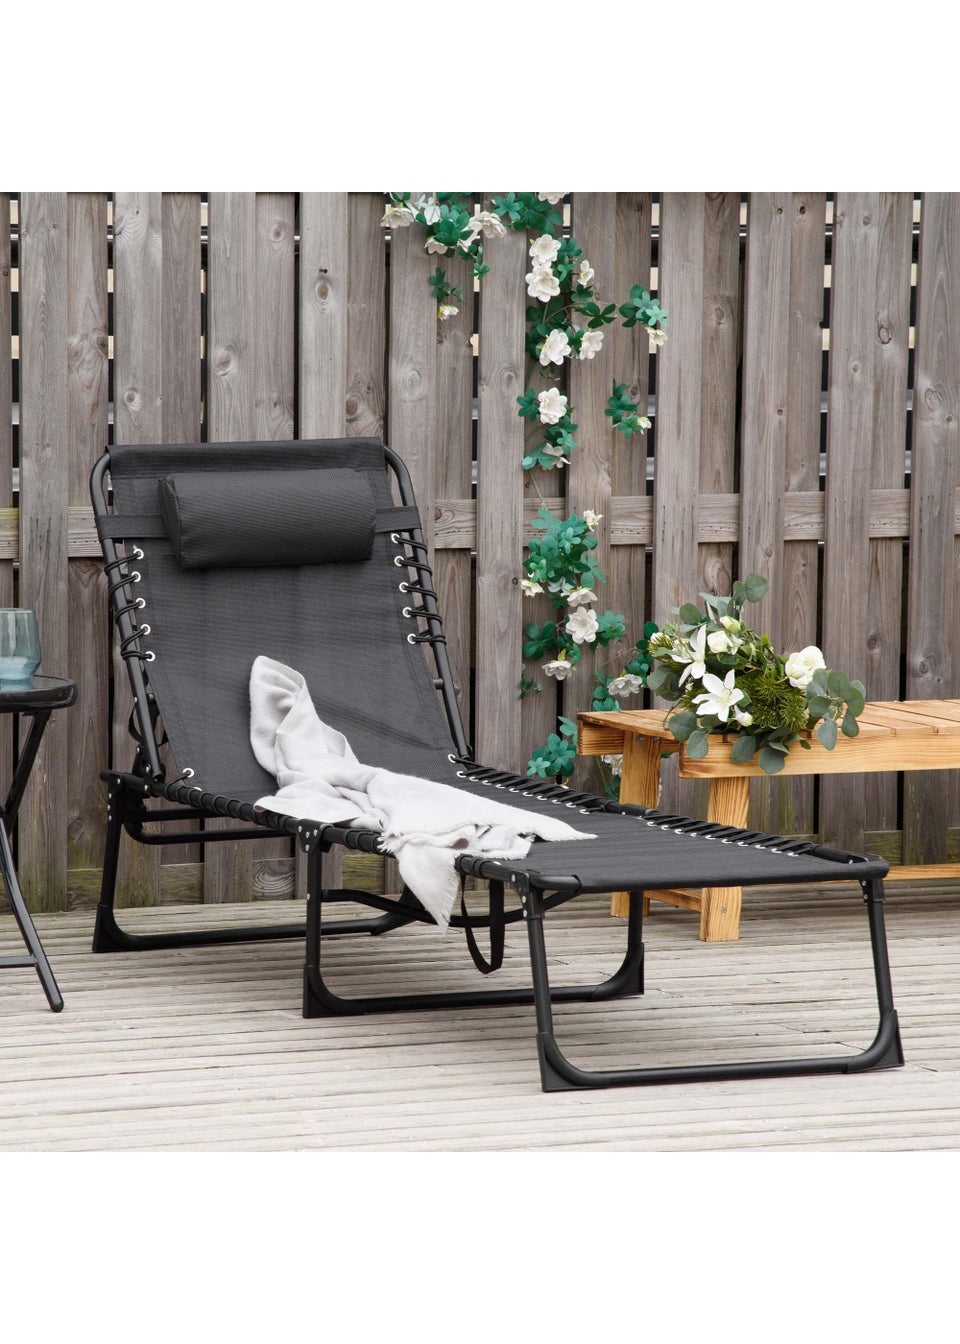 Outsunny Foldable Sun Lounger, Outdoor 4 Level Adjustable Backrest Reclining Chaise Chair